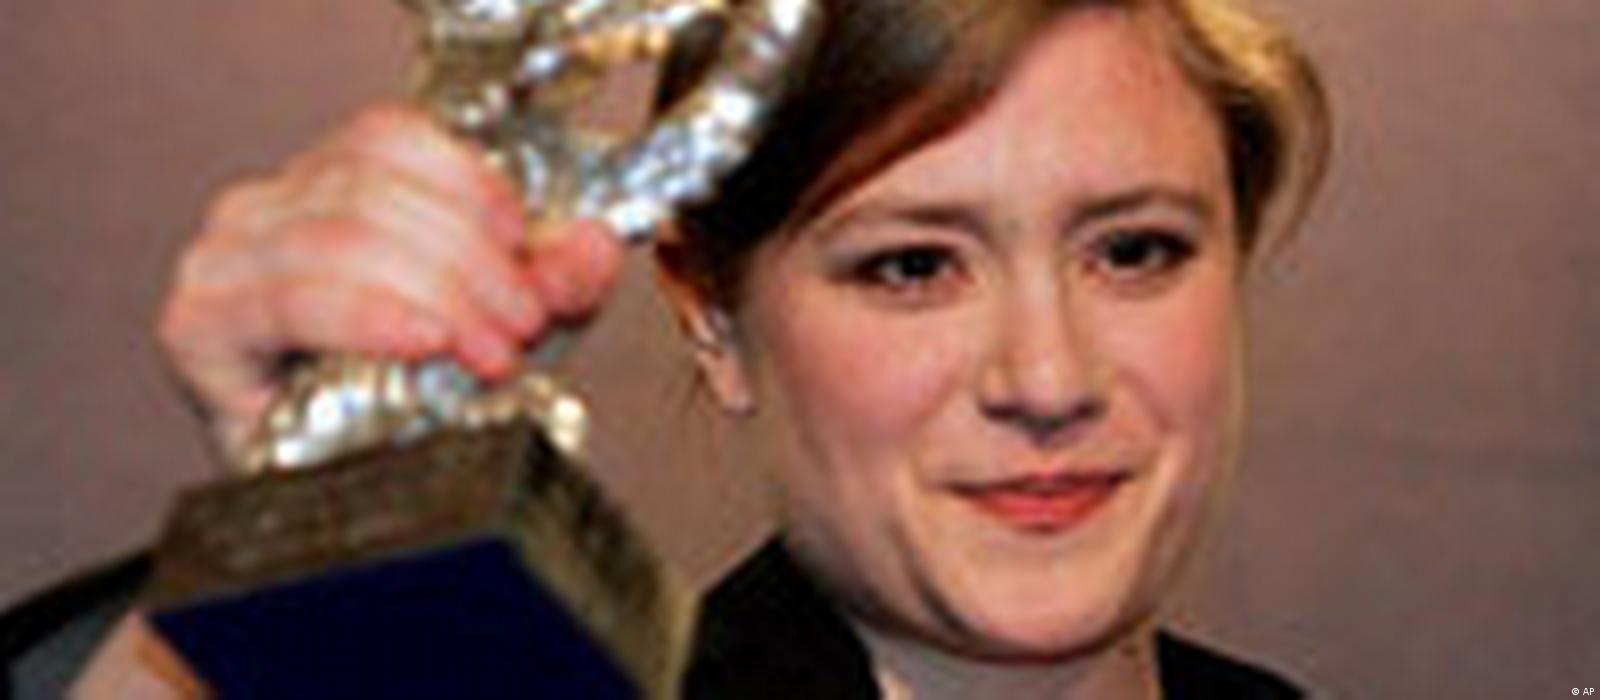 Anjelica Porn Girl - Home Favorite is Best Actress at Berlinale â€“ DW â€“ 02/20/2005